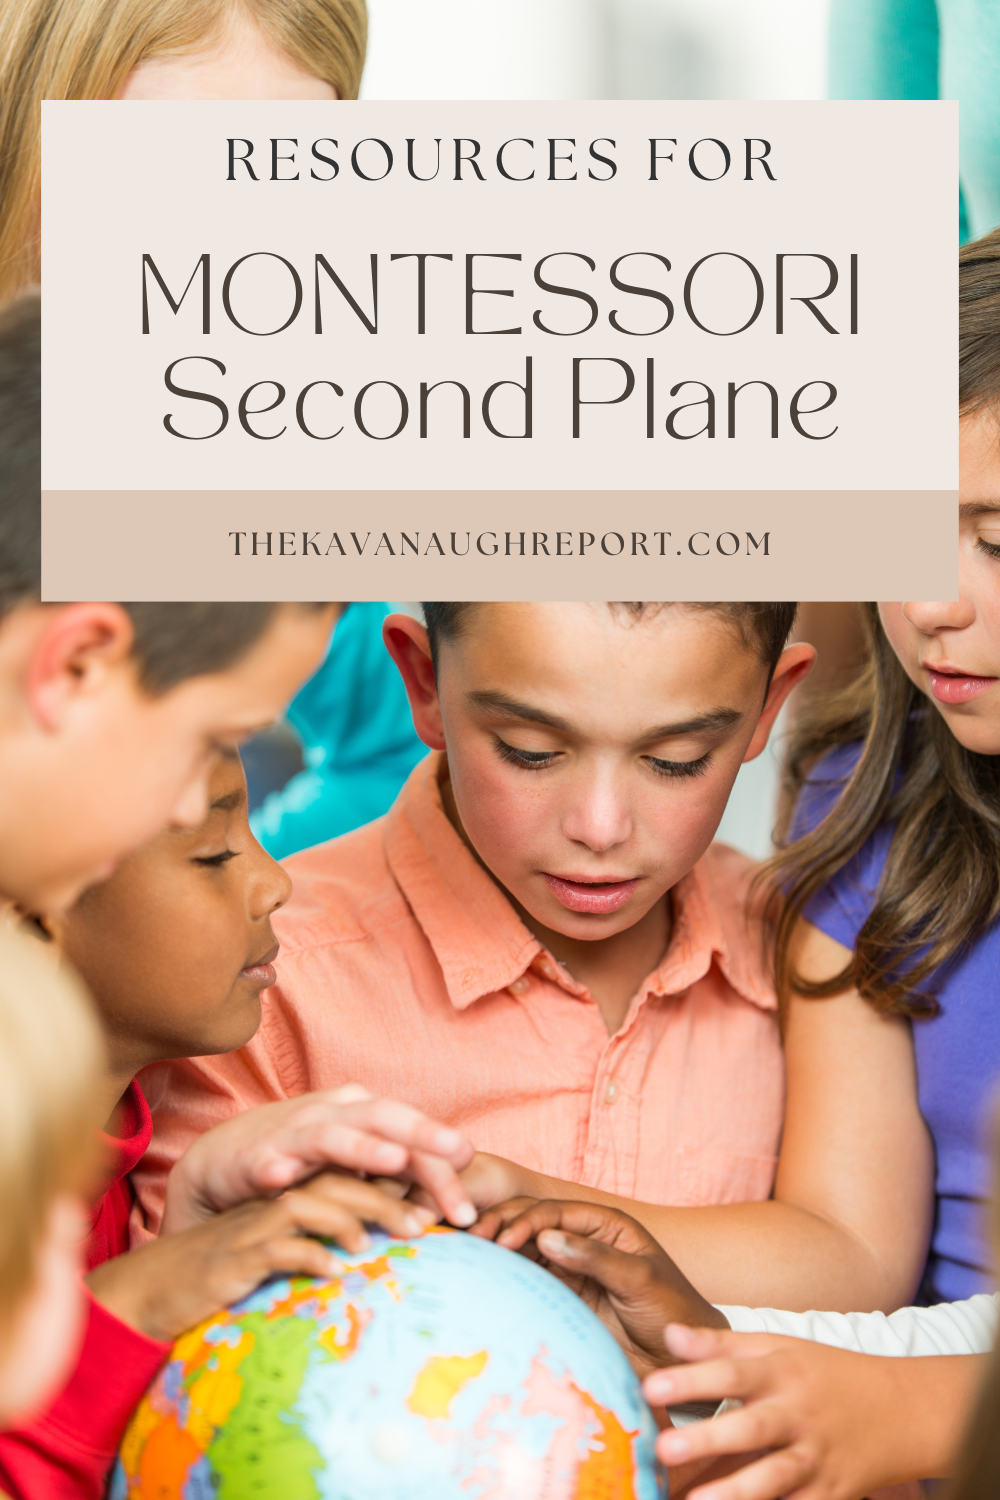 Blogs, books and video recommendations for learning more about the Montessori second plane of development.